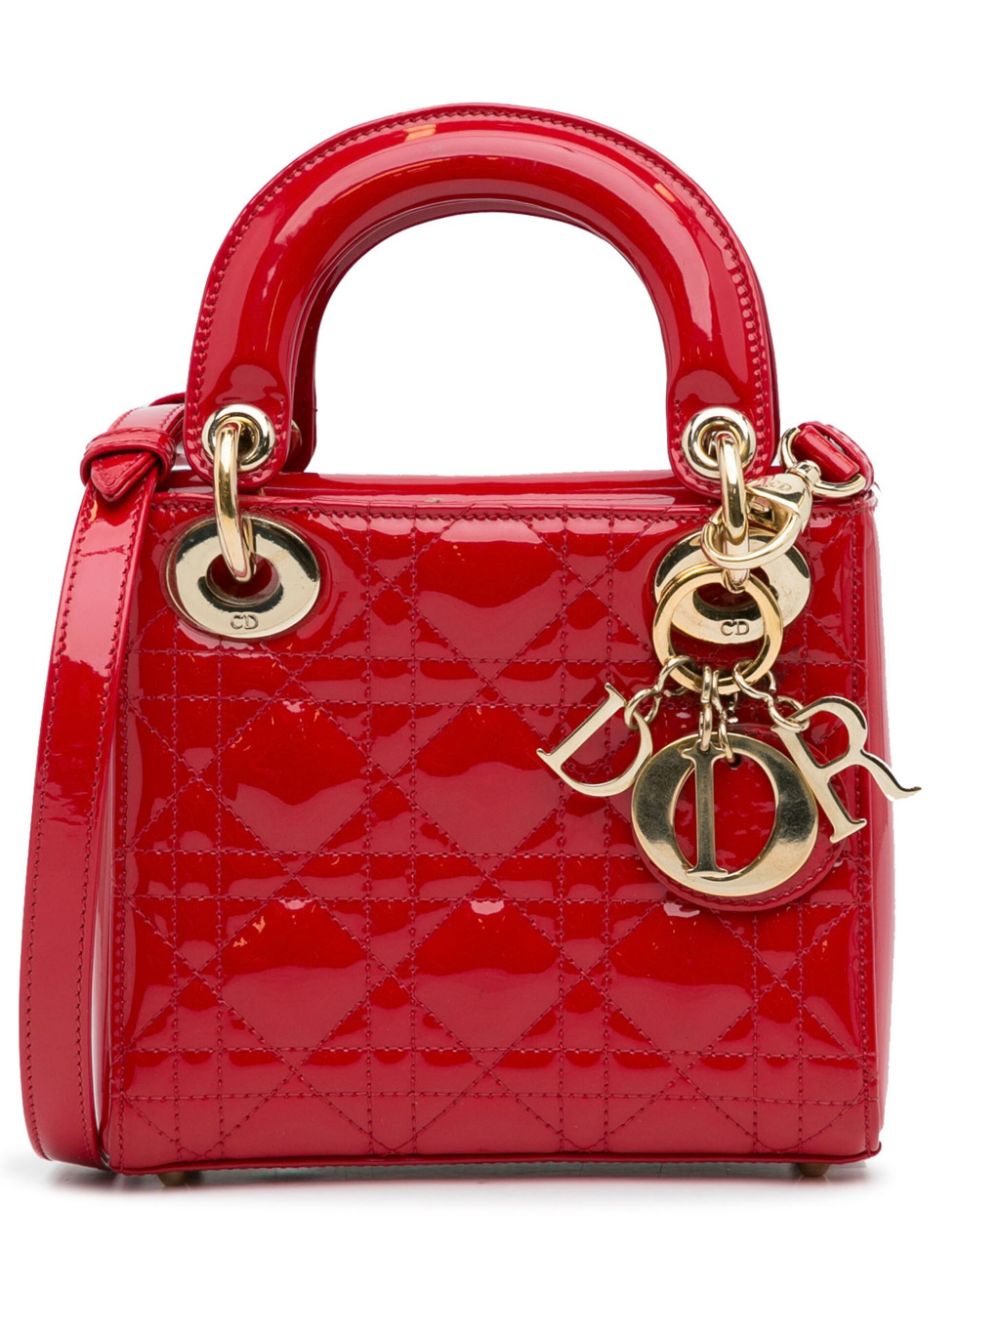 Lady Dior and Diorissimo Bags from Fall 2015 In Stores - Spotted Fashion